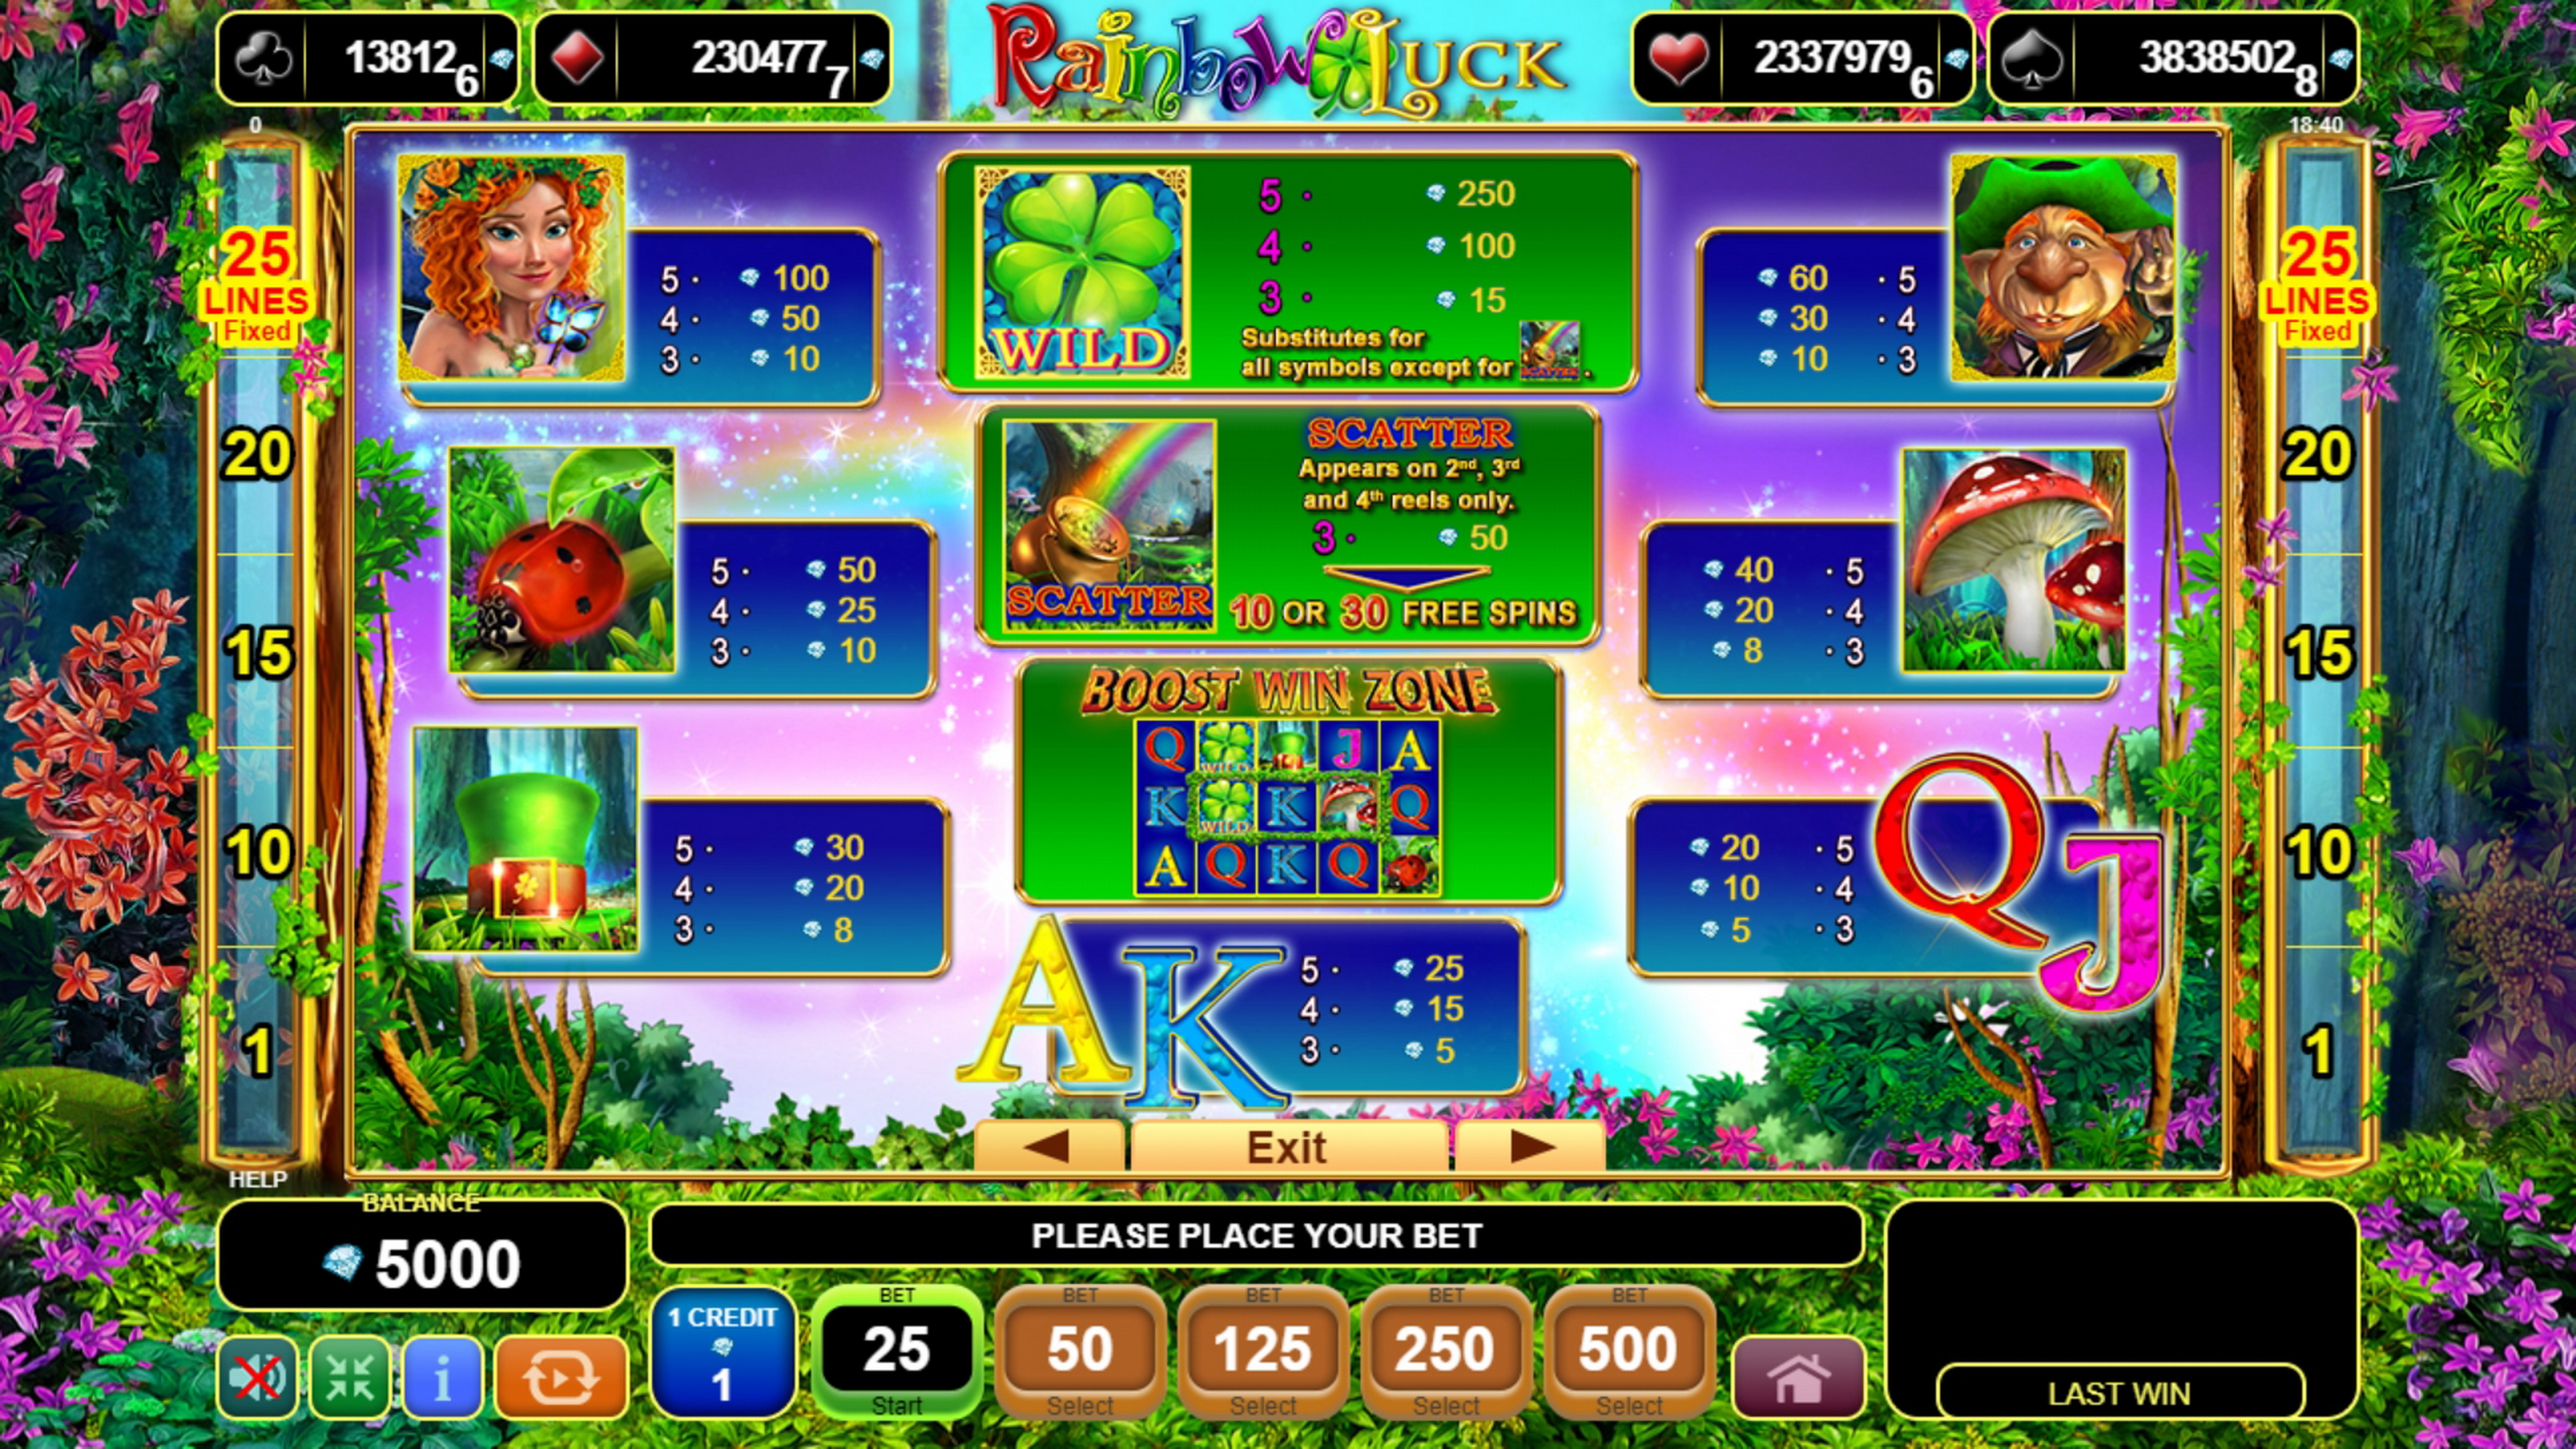 Info of Rainbow Luck Slot Game by EGT